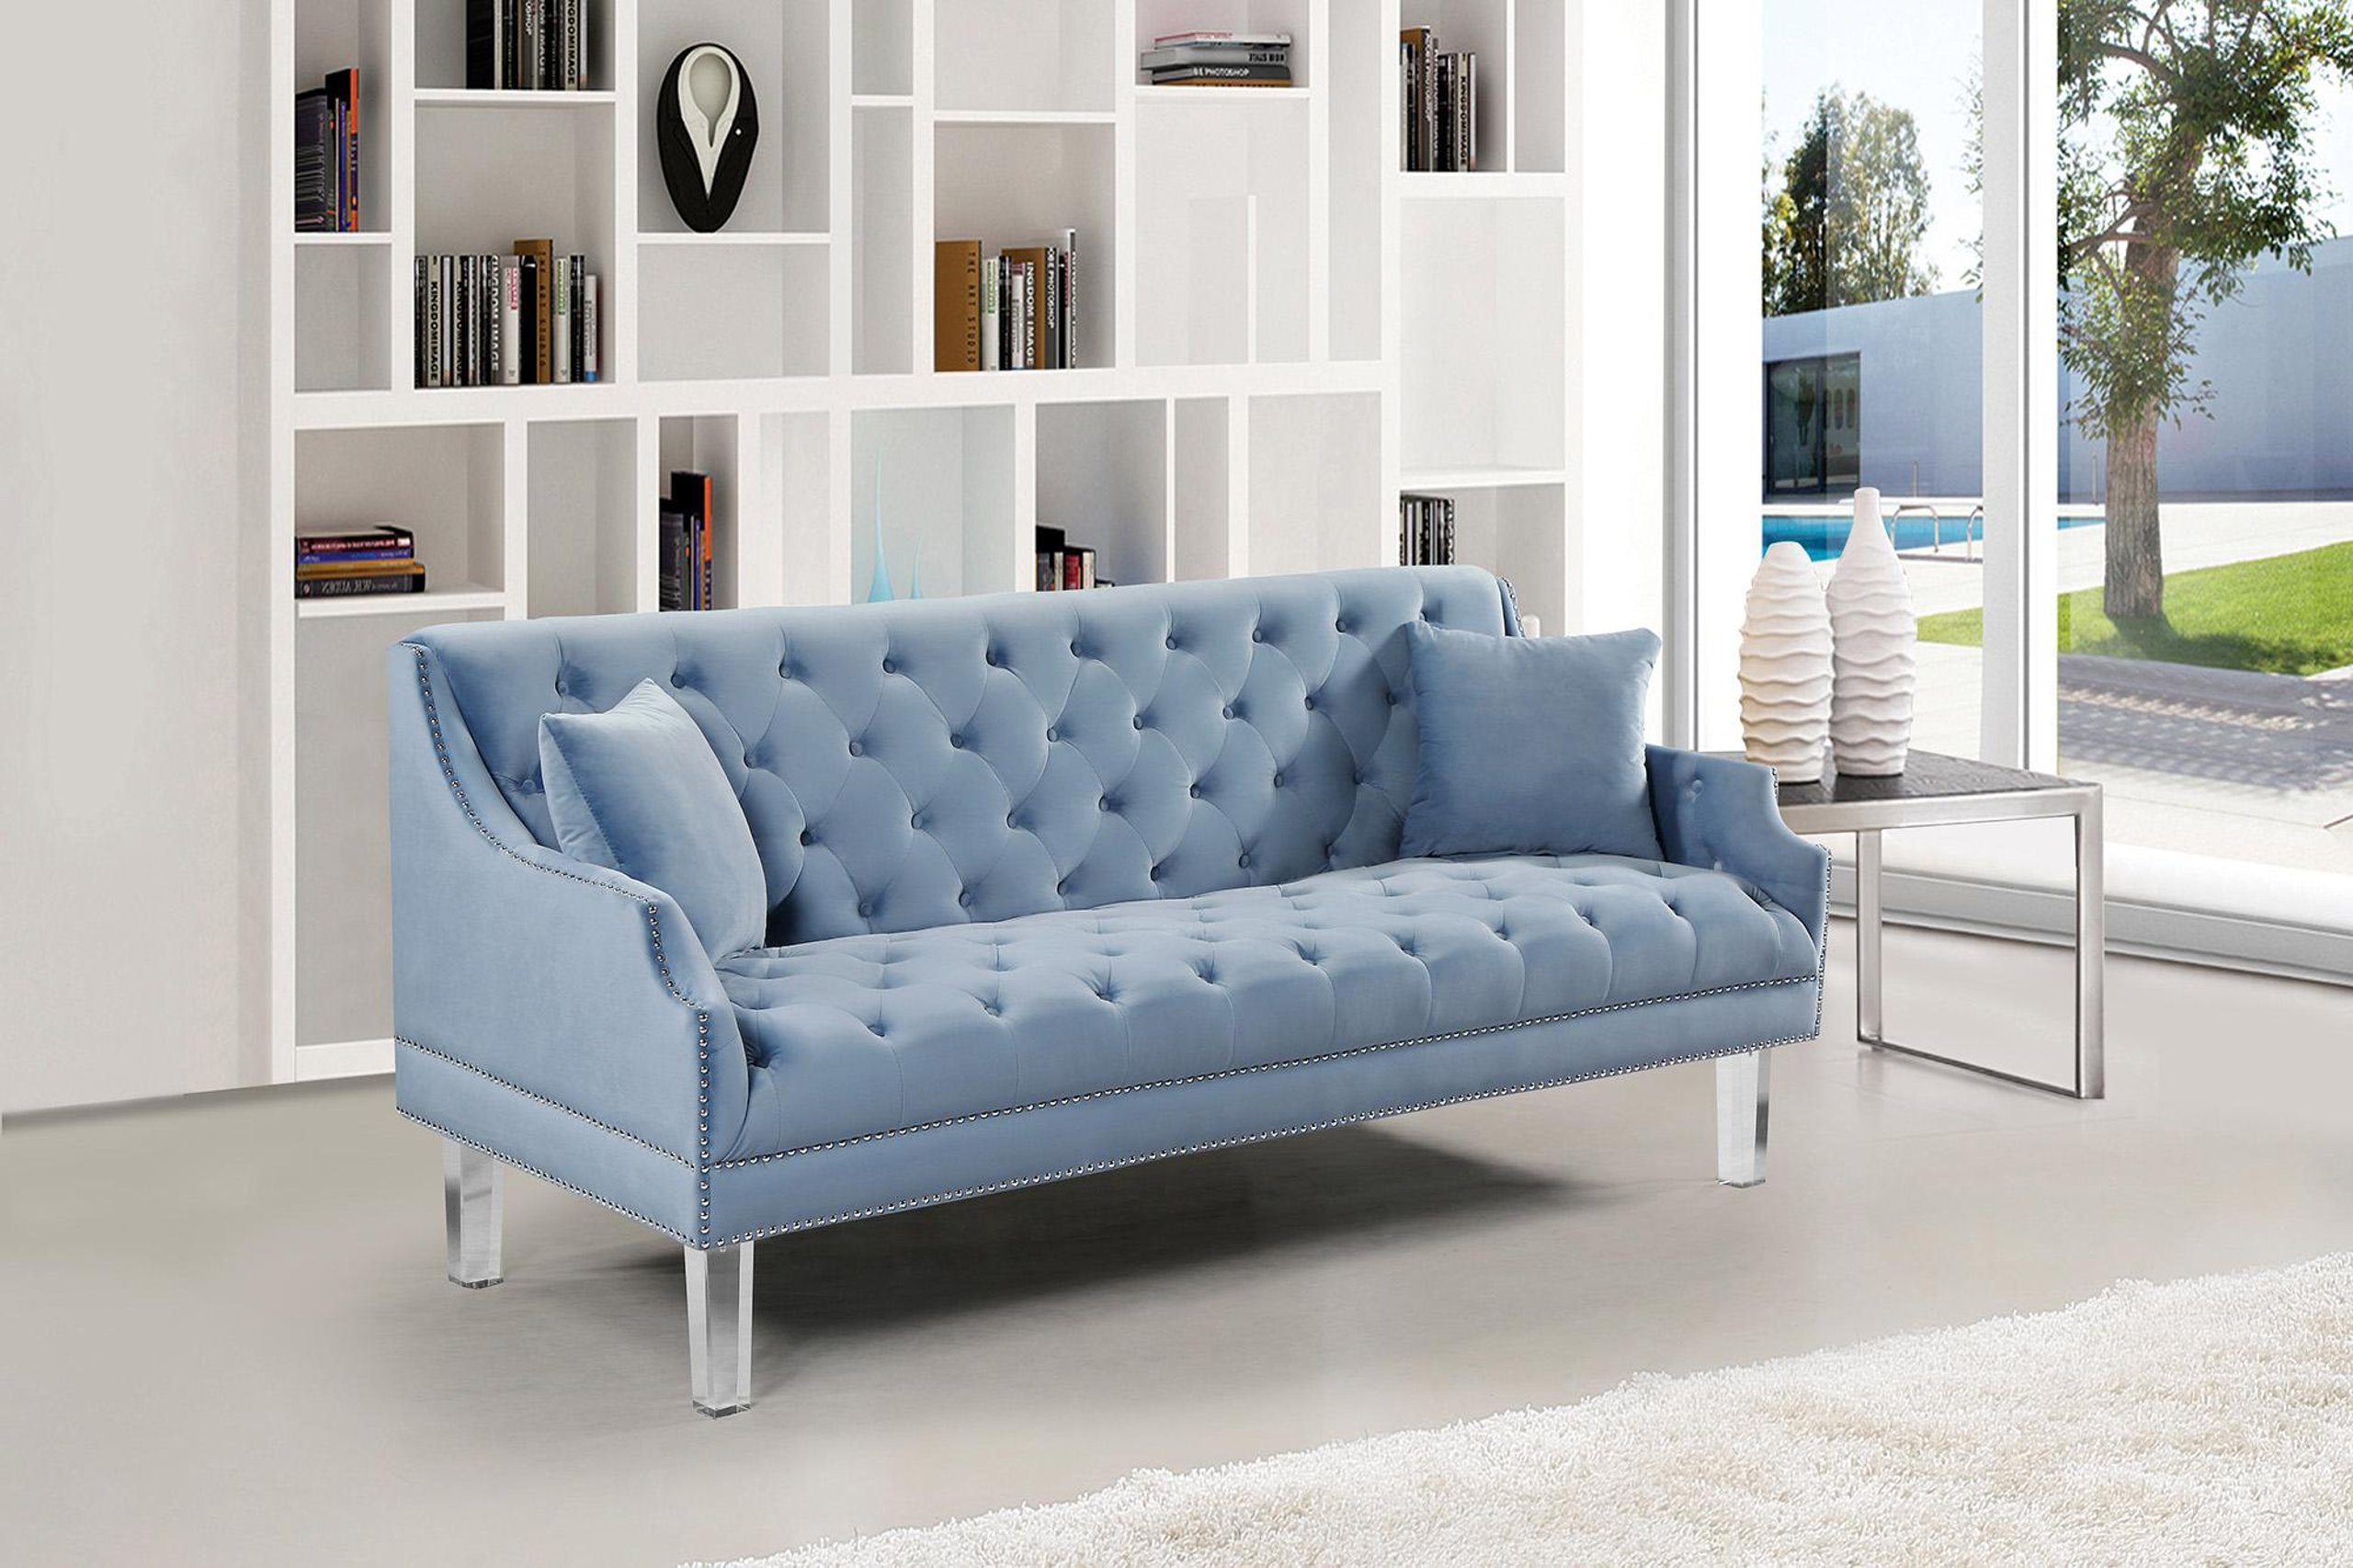 maat Vrijstelling Voordracht Sky Blue Velvet Button Tufting Sofa Set 2P Roxy 635SkyBlu Meridian  Contemporary – buy online on NY Furniture Outlet